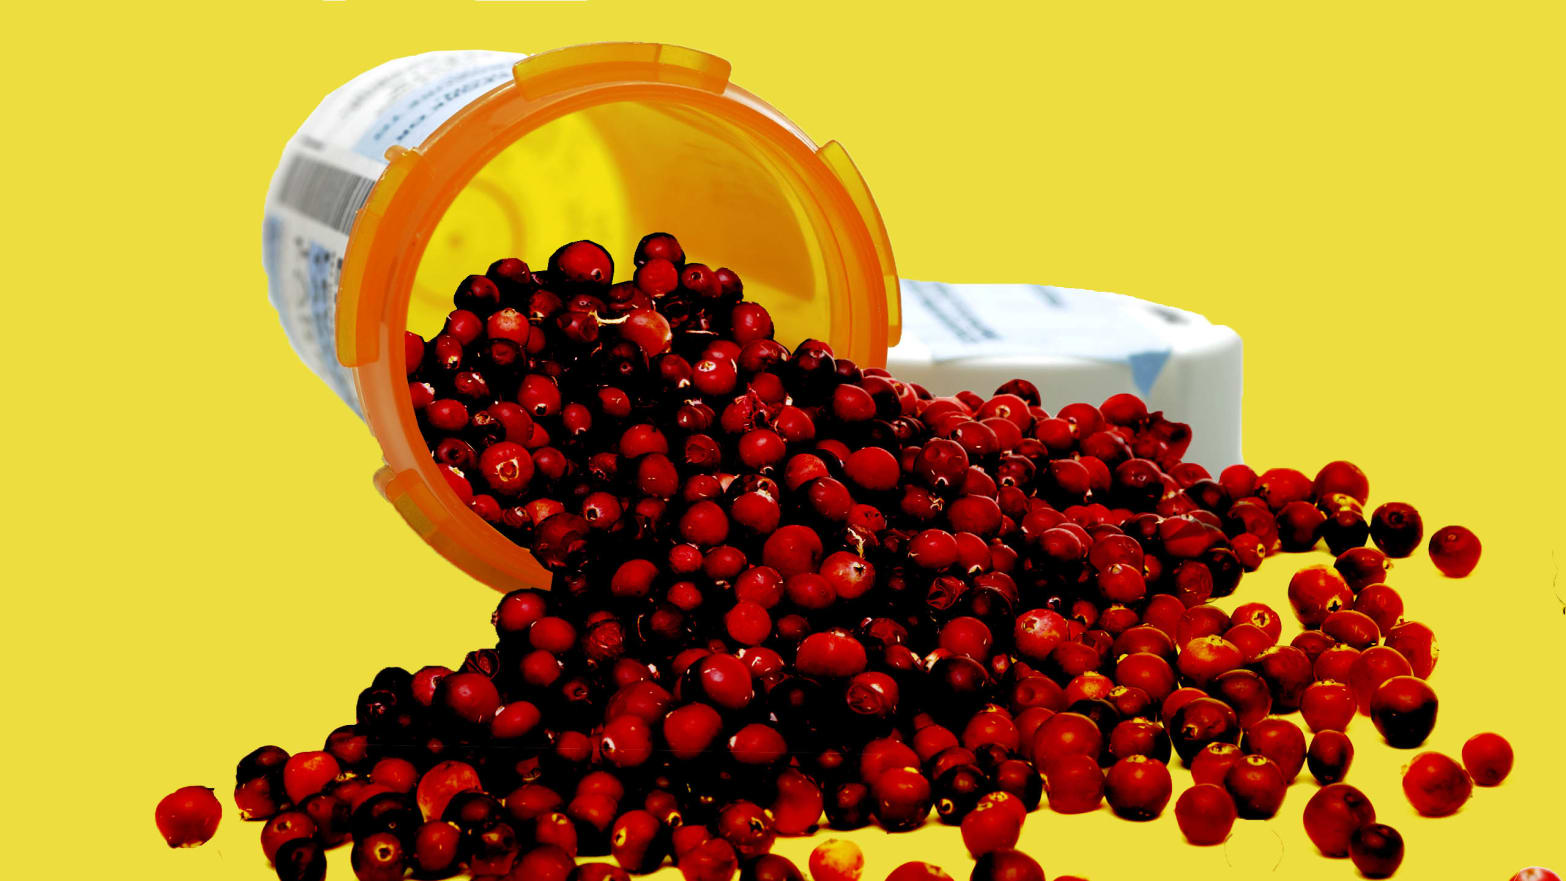 illustration of cranberries spilling out of a pill bottle cranberry juice uti urinary tract infection does it work thanksgiving canned jelly antibiotics